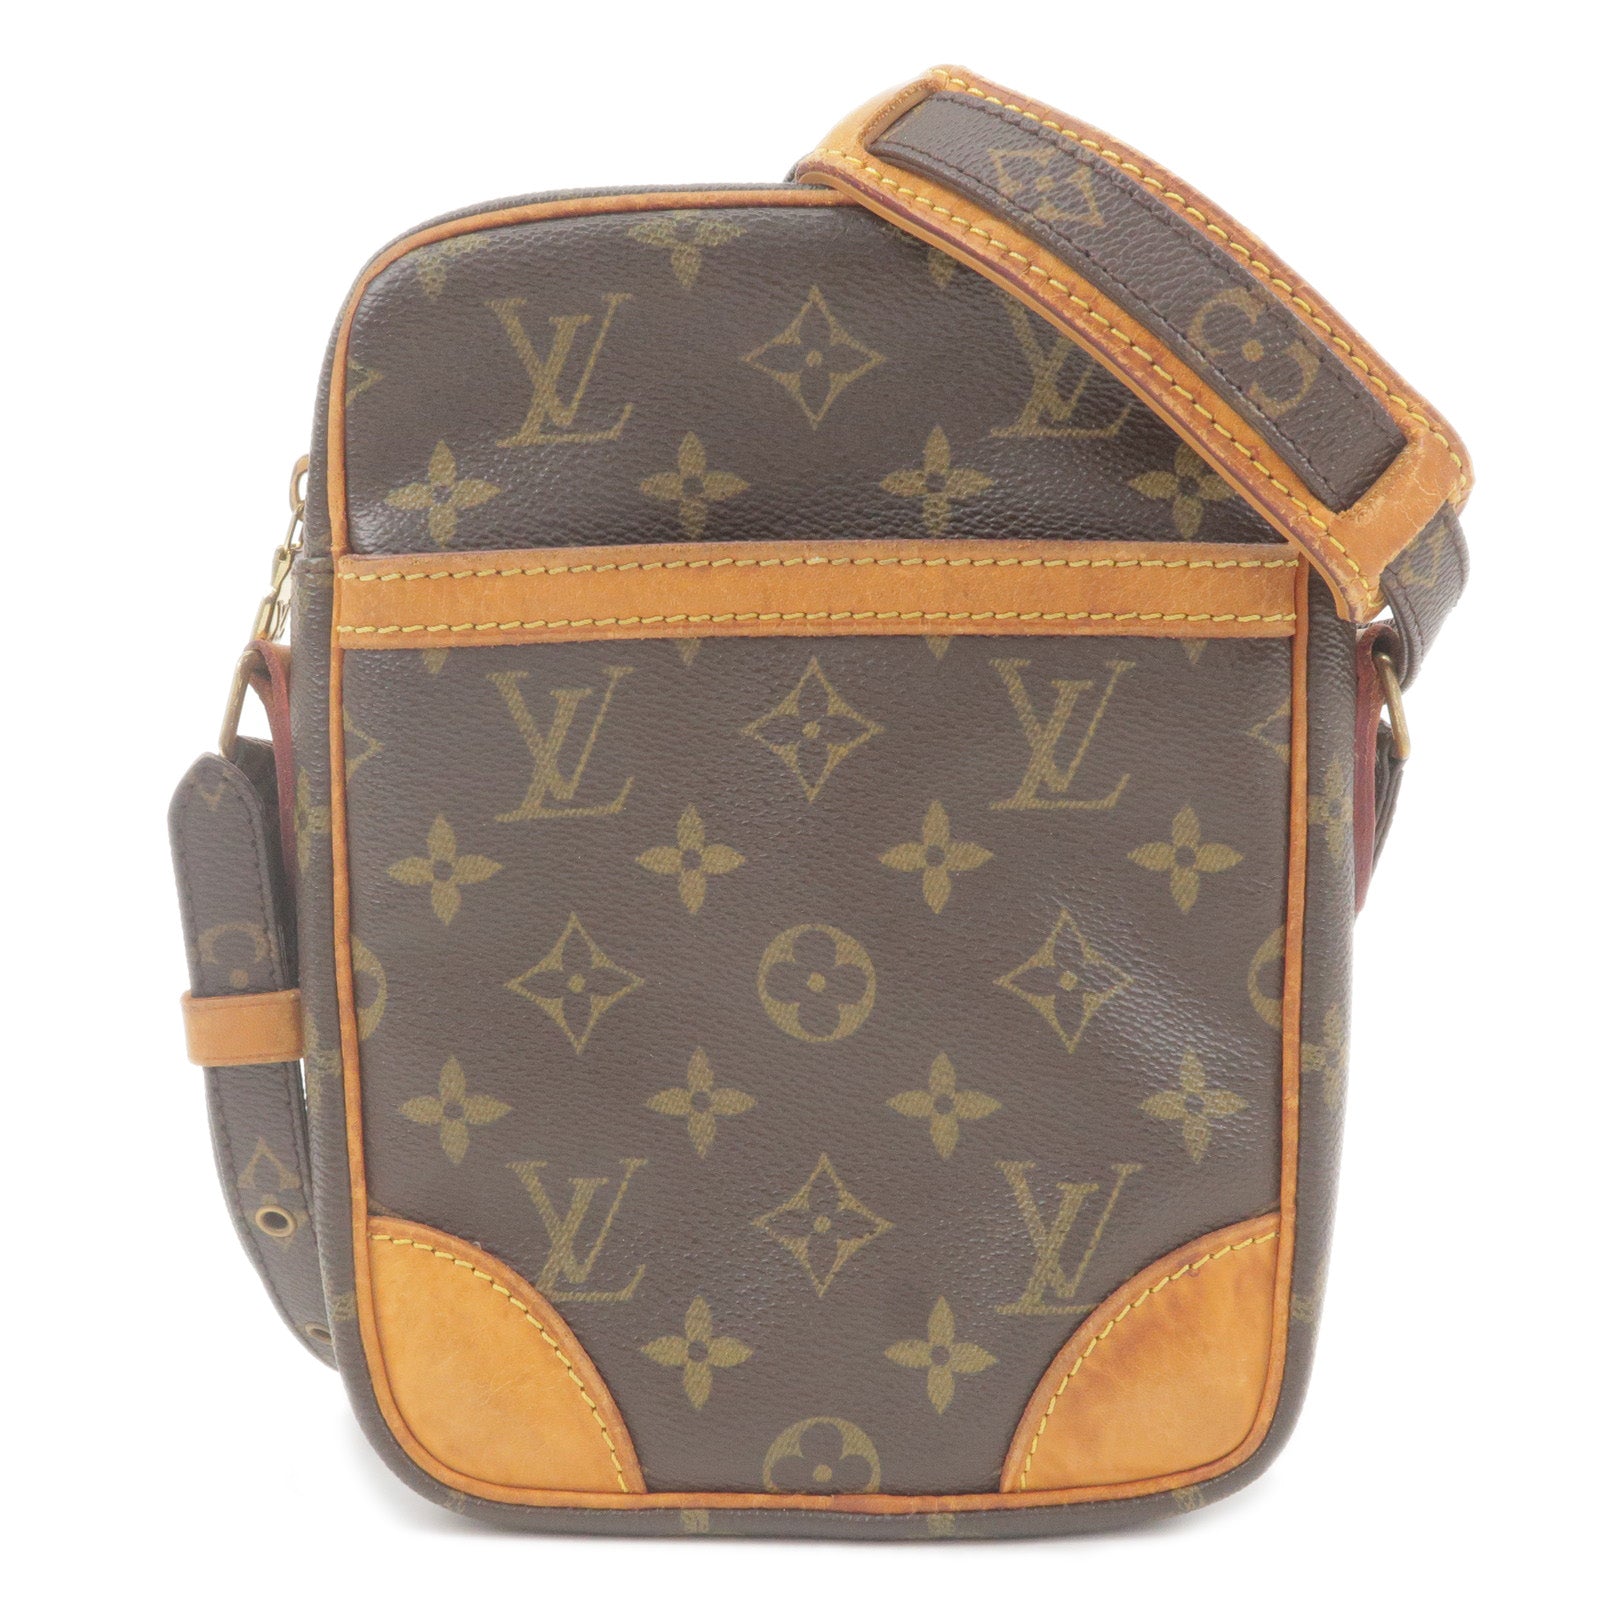 Louis Vuitton Danube : Review and what fits 